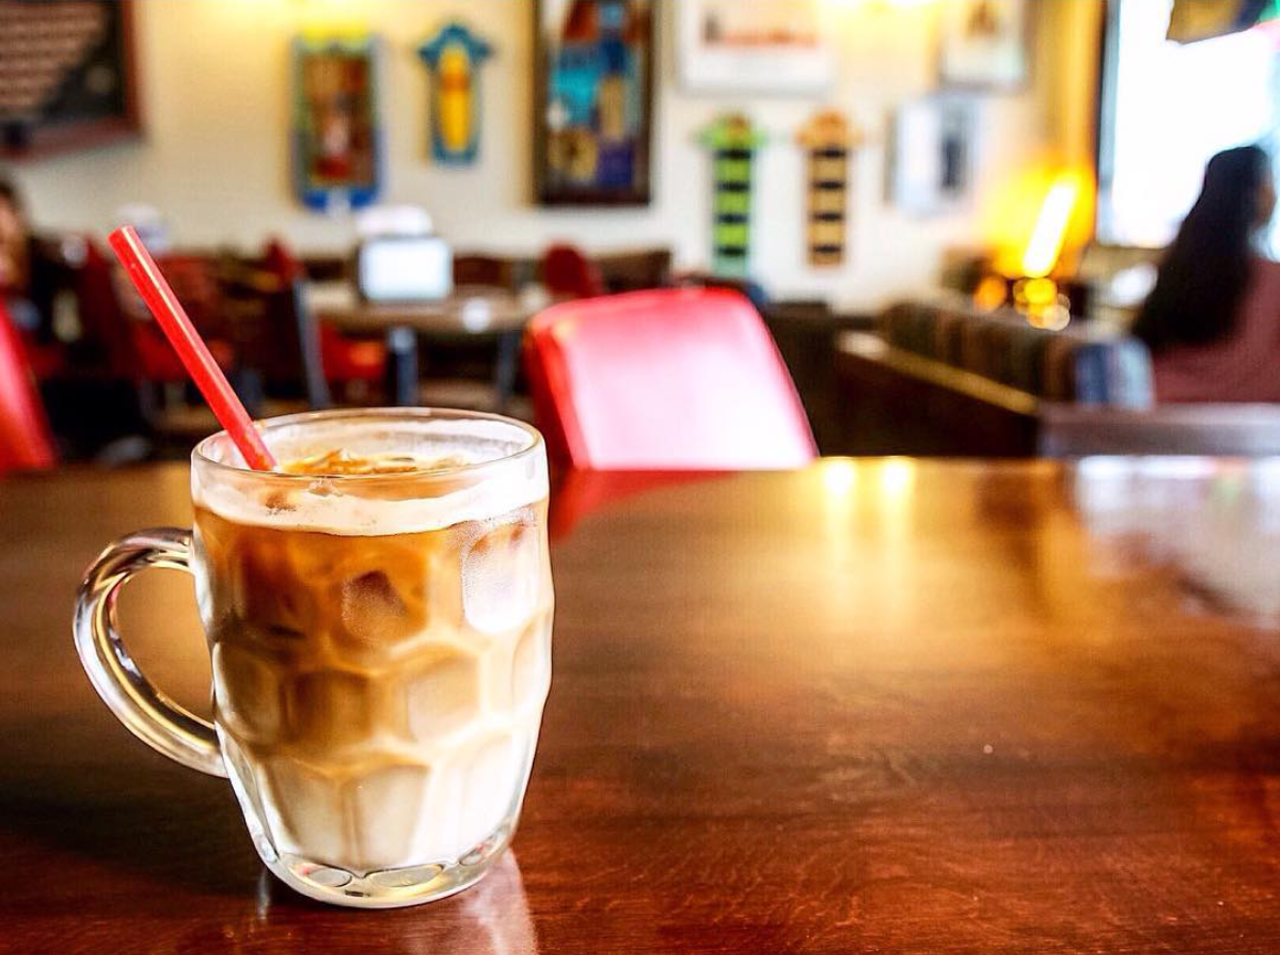 Drink This: Iced horchata latte
Though currently closed for renovations (you’ll have to get your barbacoa grilled cheese fix at Sabina’s Coffee House in the meantime), Barrio Barista is home to chill digs and coffee by local roasters What’s Brewing. Stop in for spoken word when the shop reopens after February 14.
Photo via Instagram / s.a.foodie